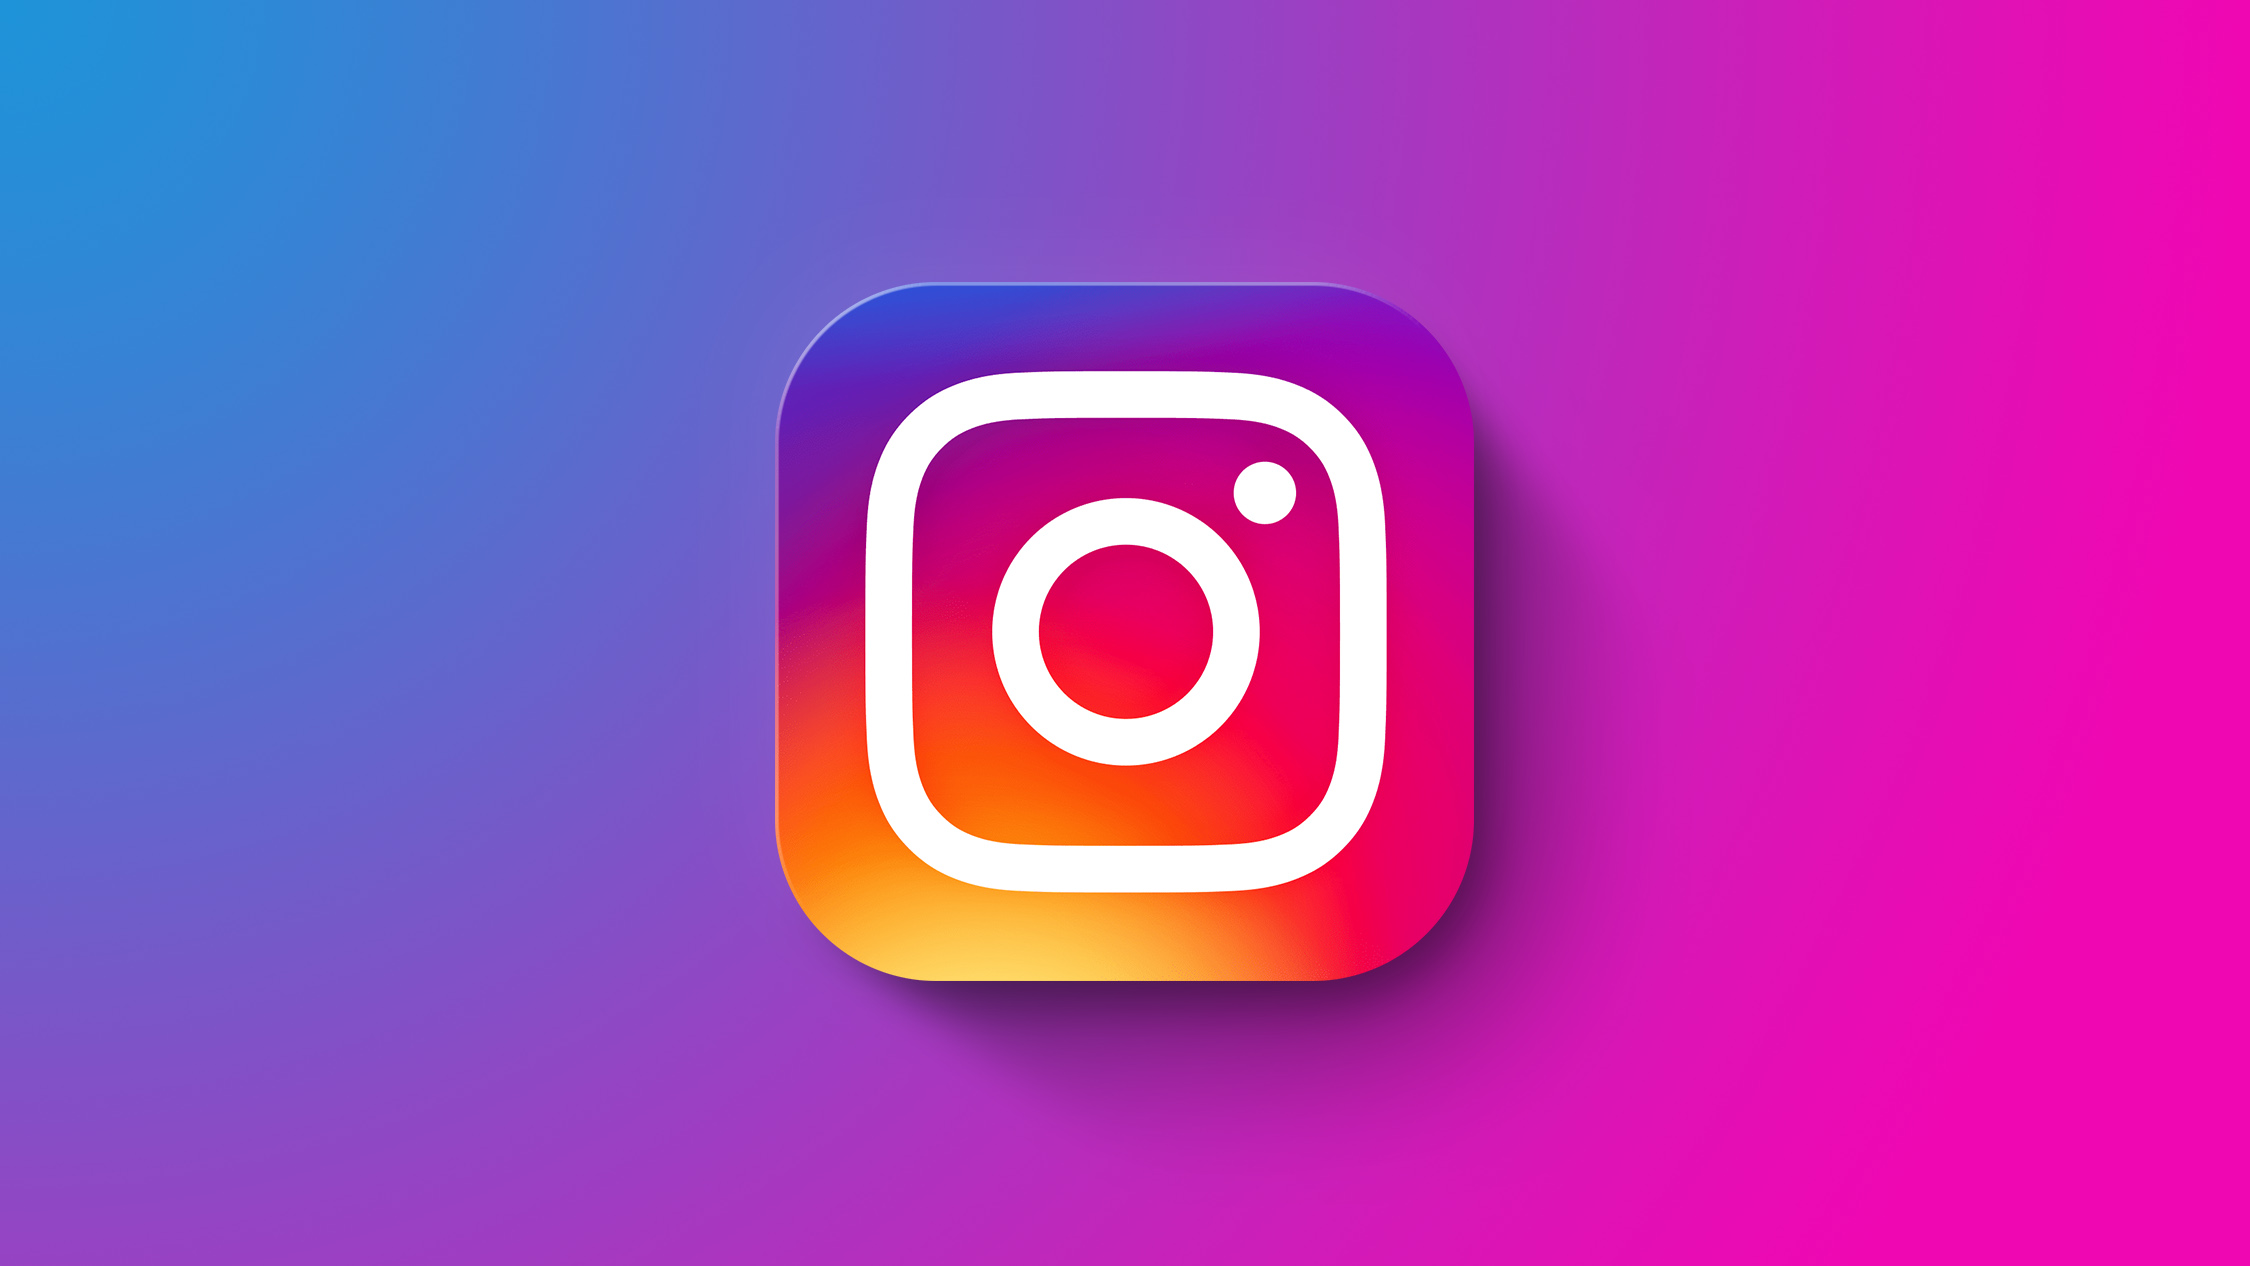 Instagram Adds Option to Delete Account in iOS App to Comply With App Store Rules